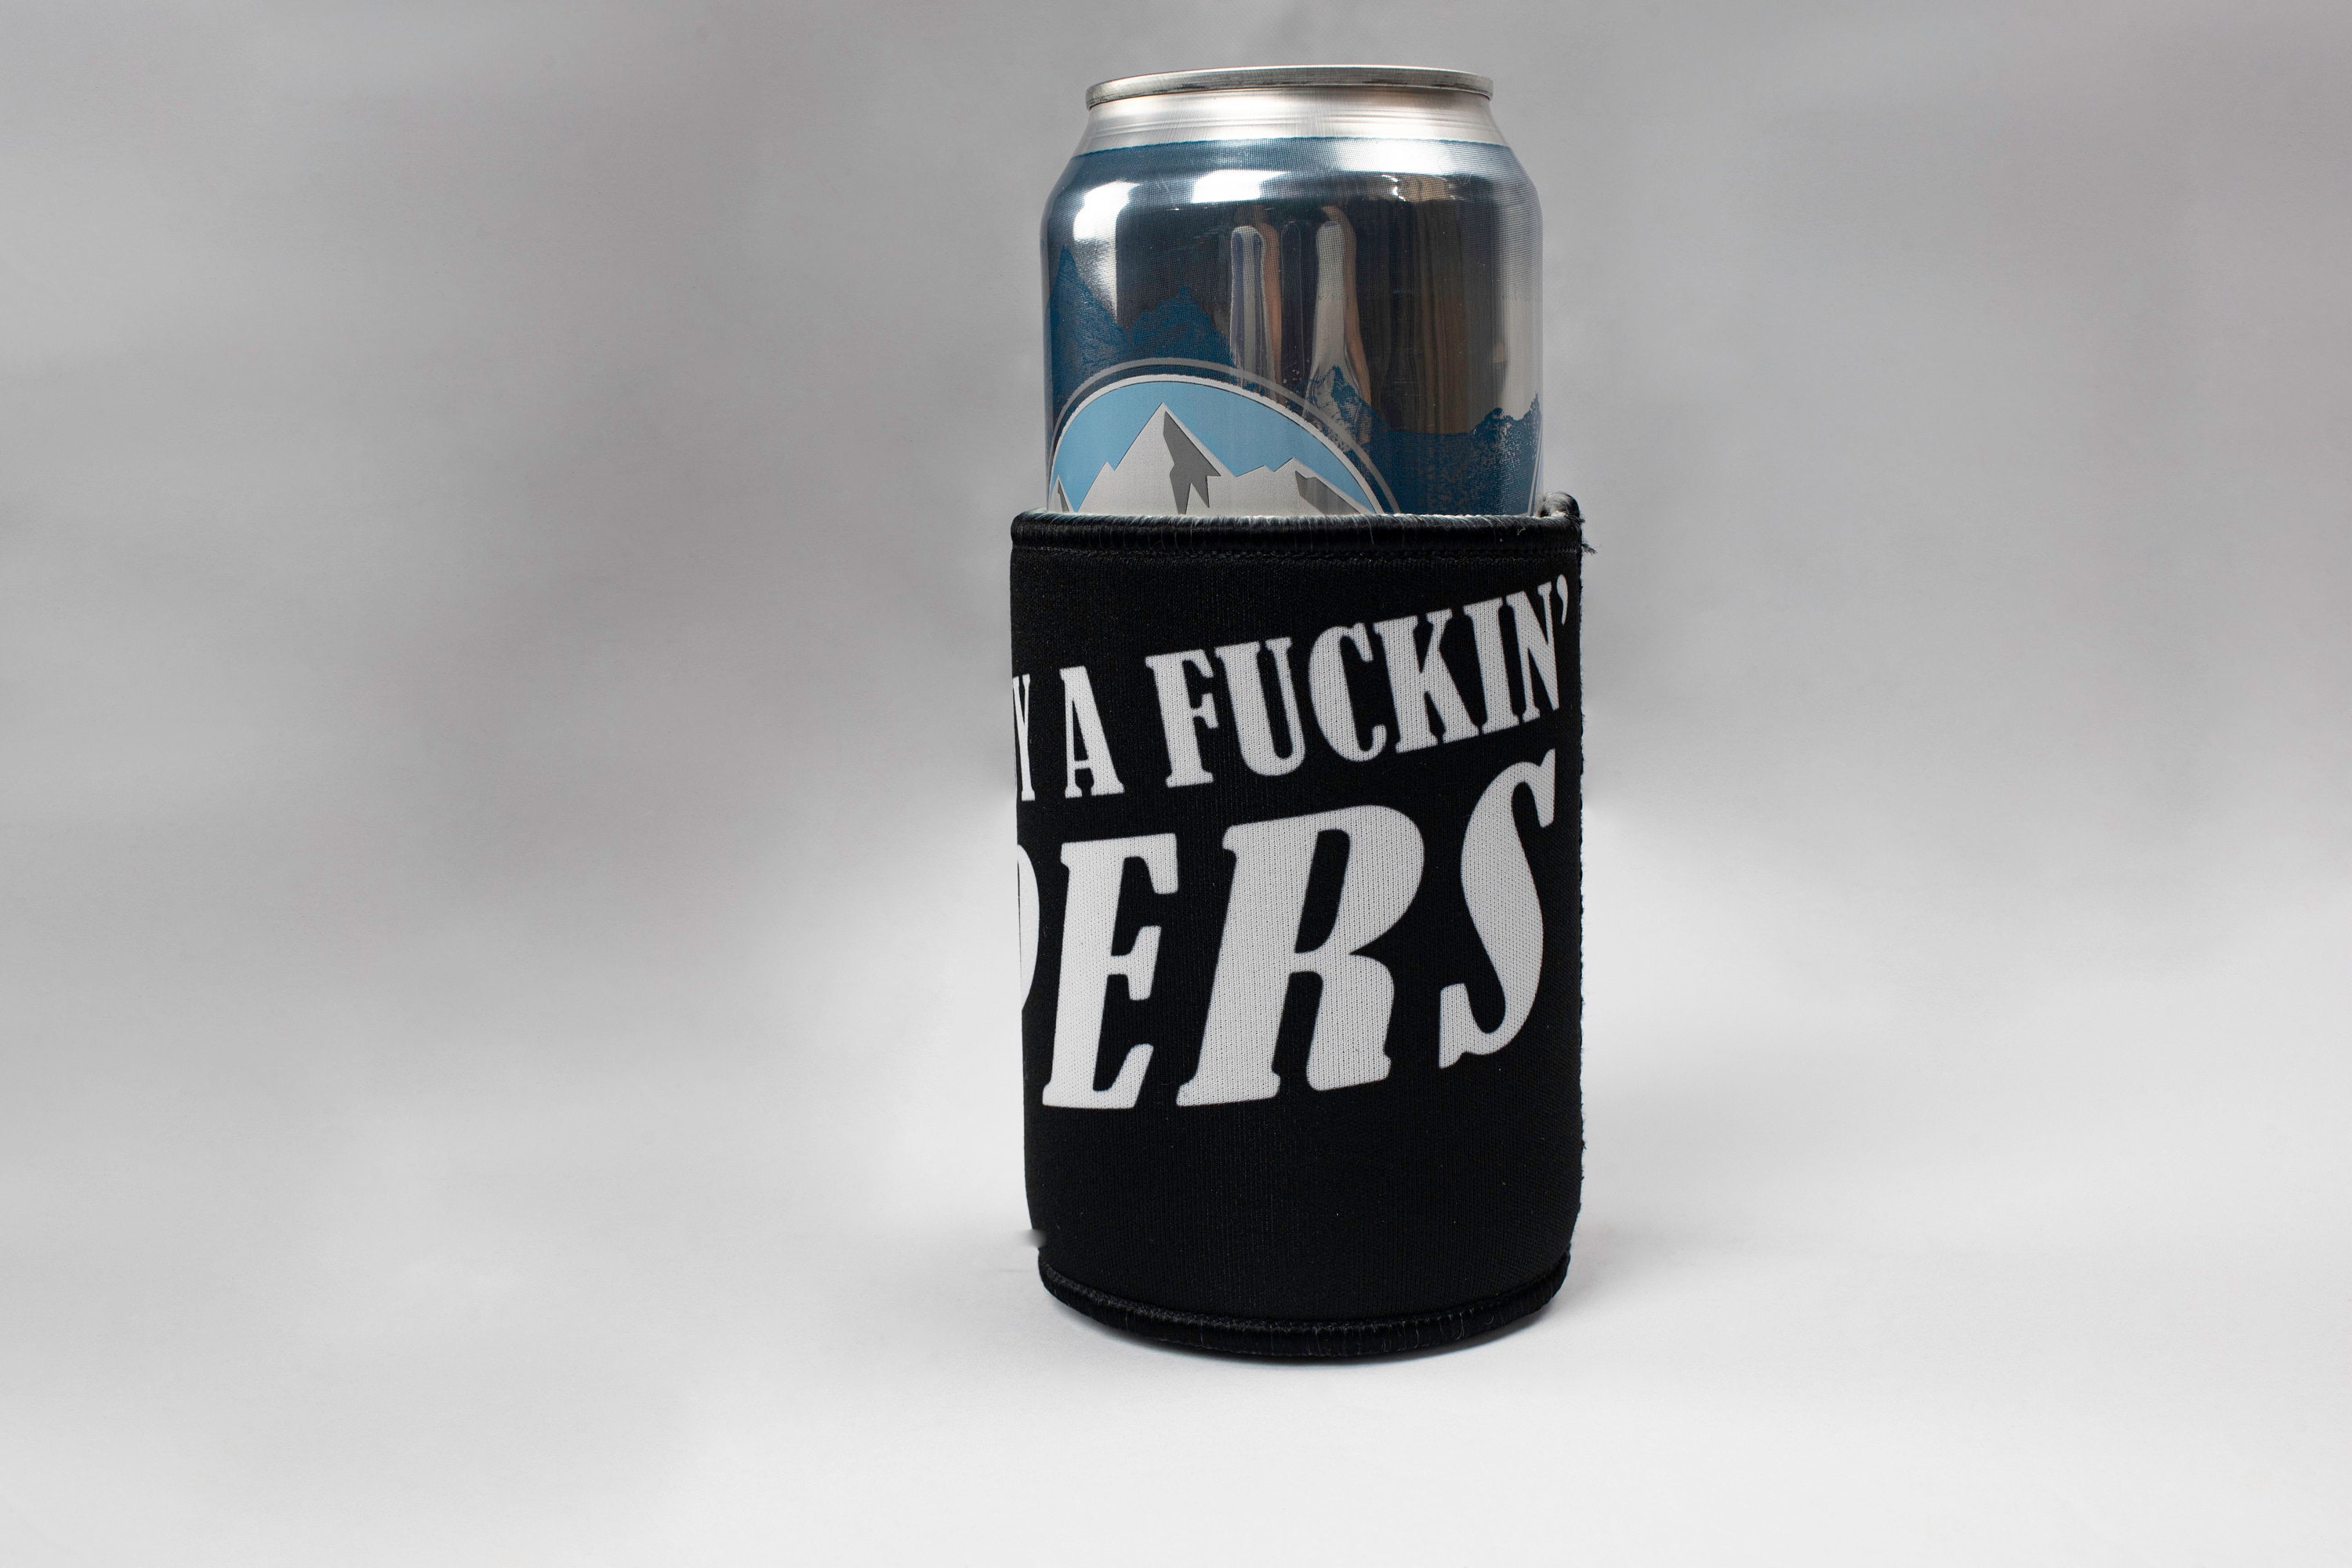 Set of 4 Letterkenny Can Koozies (How Are Ya Now, Pitter Patter, Puppers,  10-4)